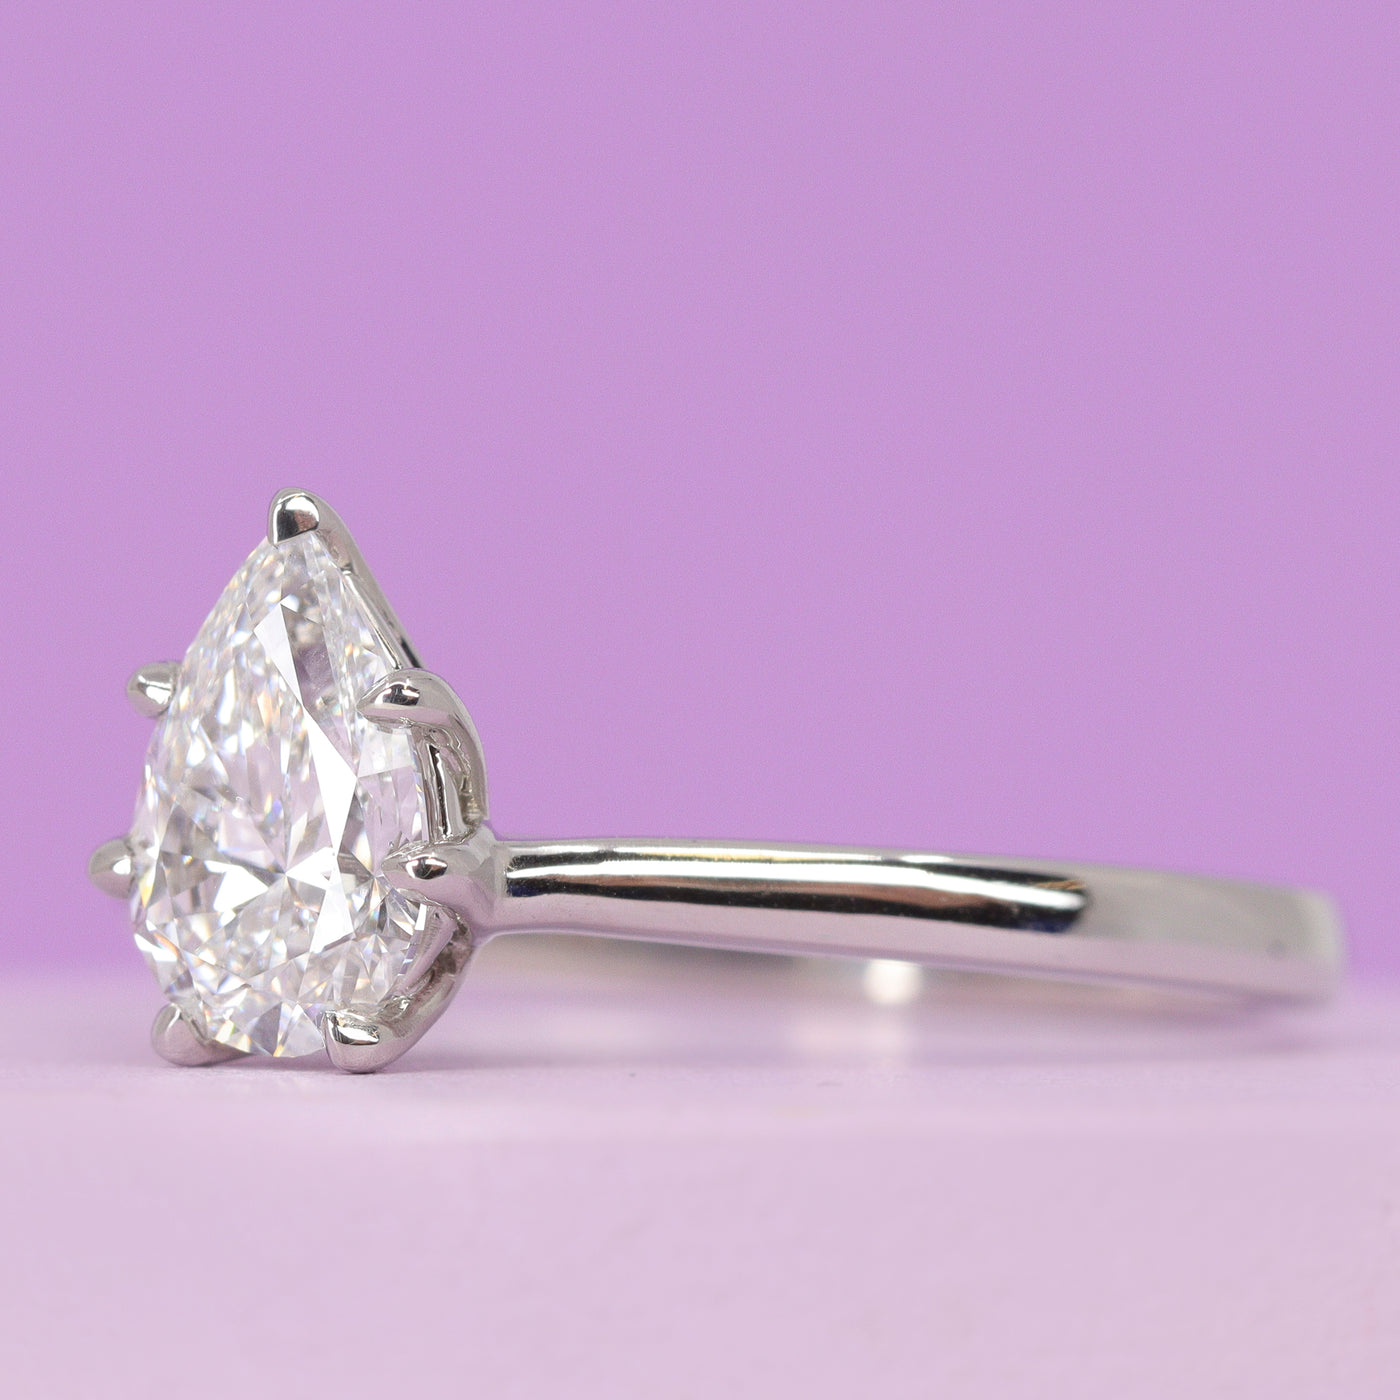 Raine - Pear/Teardrop Cut Lab or Earth Grown Diamond Solitaire Ring with Lotus Flower Inspired Setting - Made-to-Order